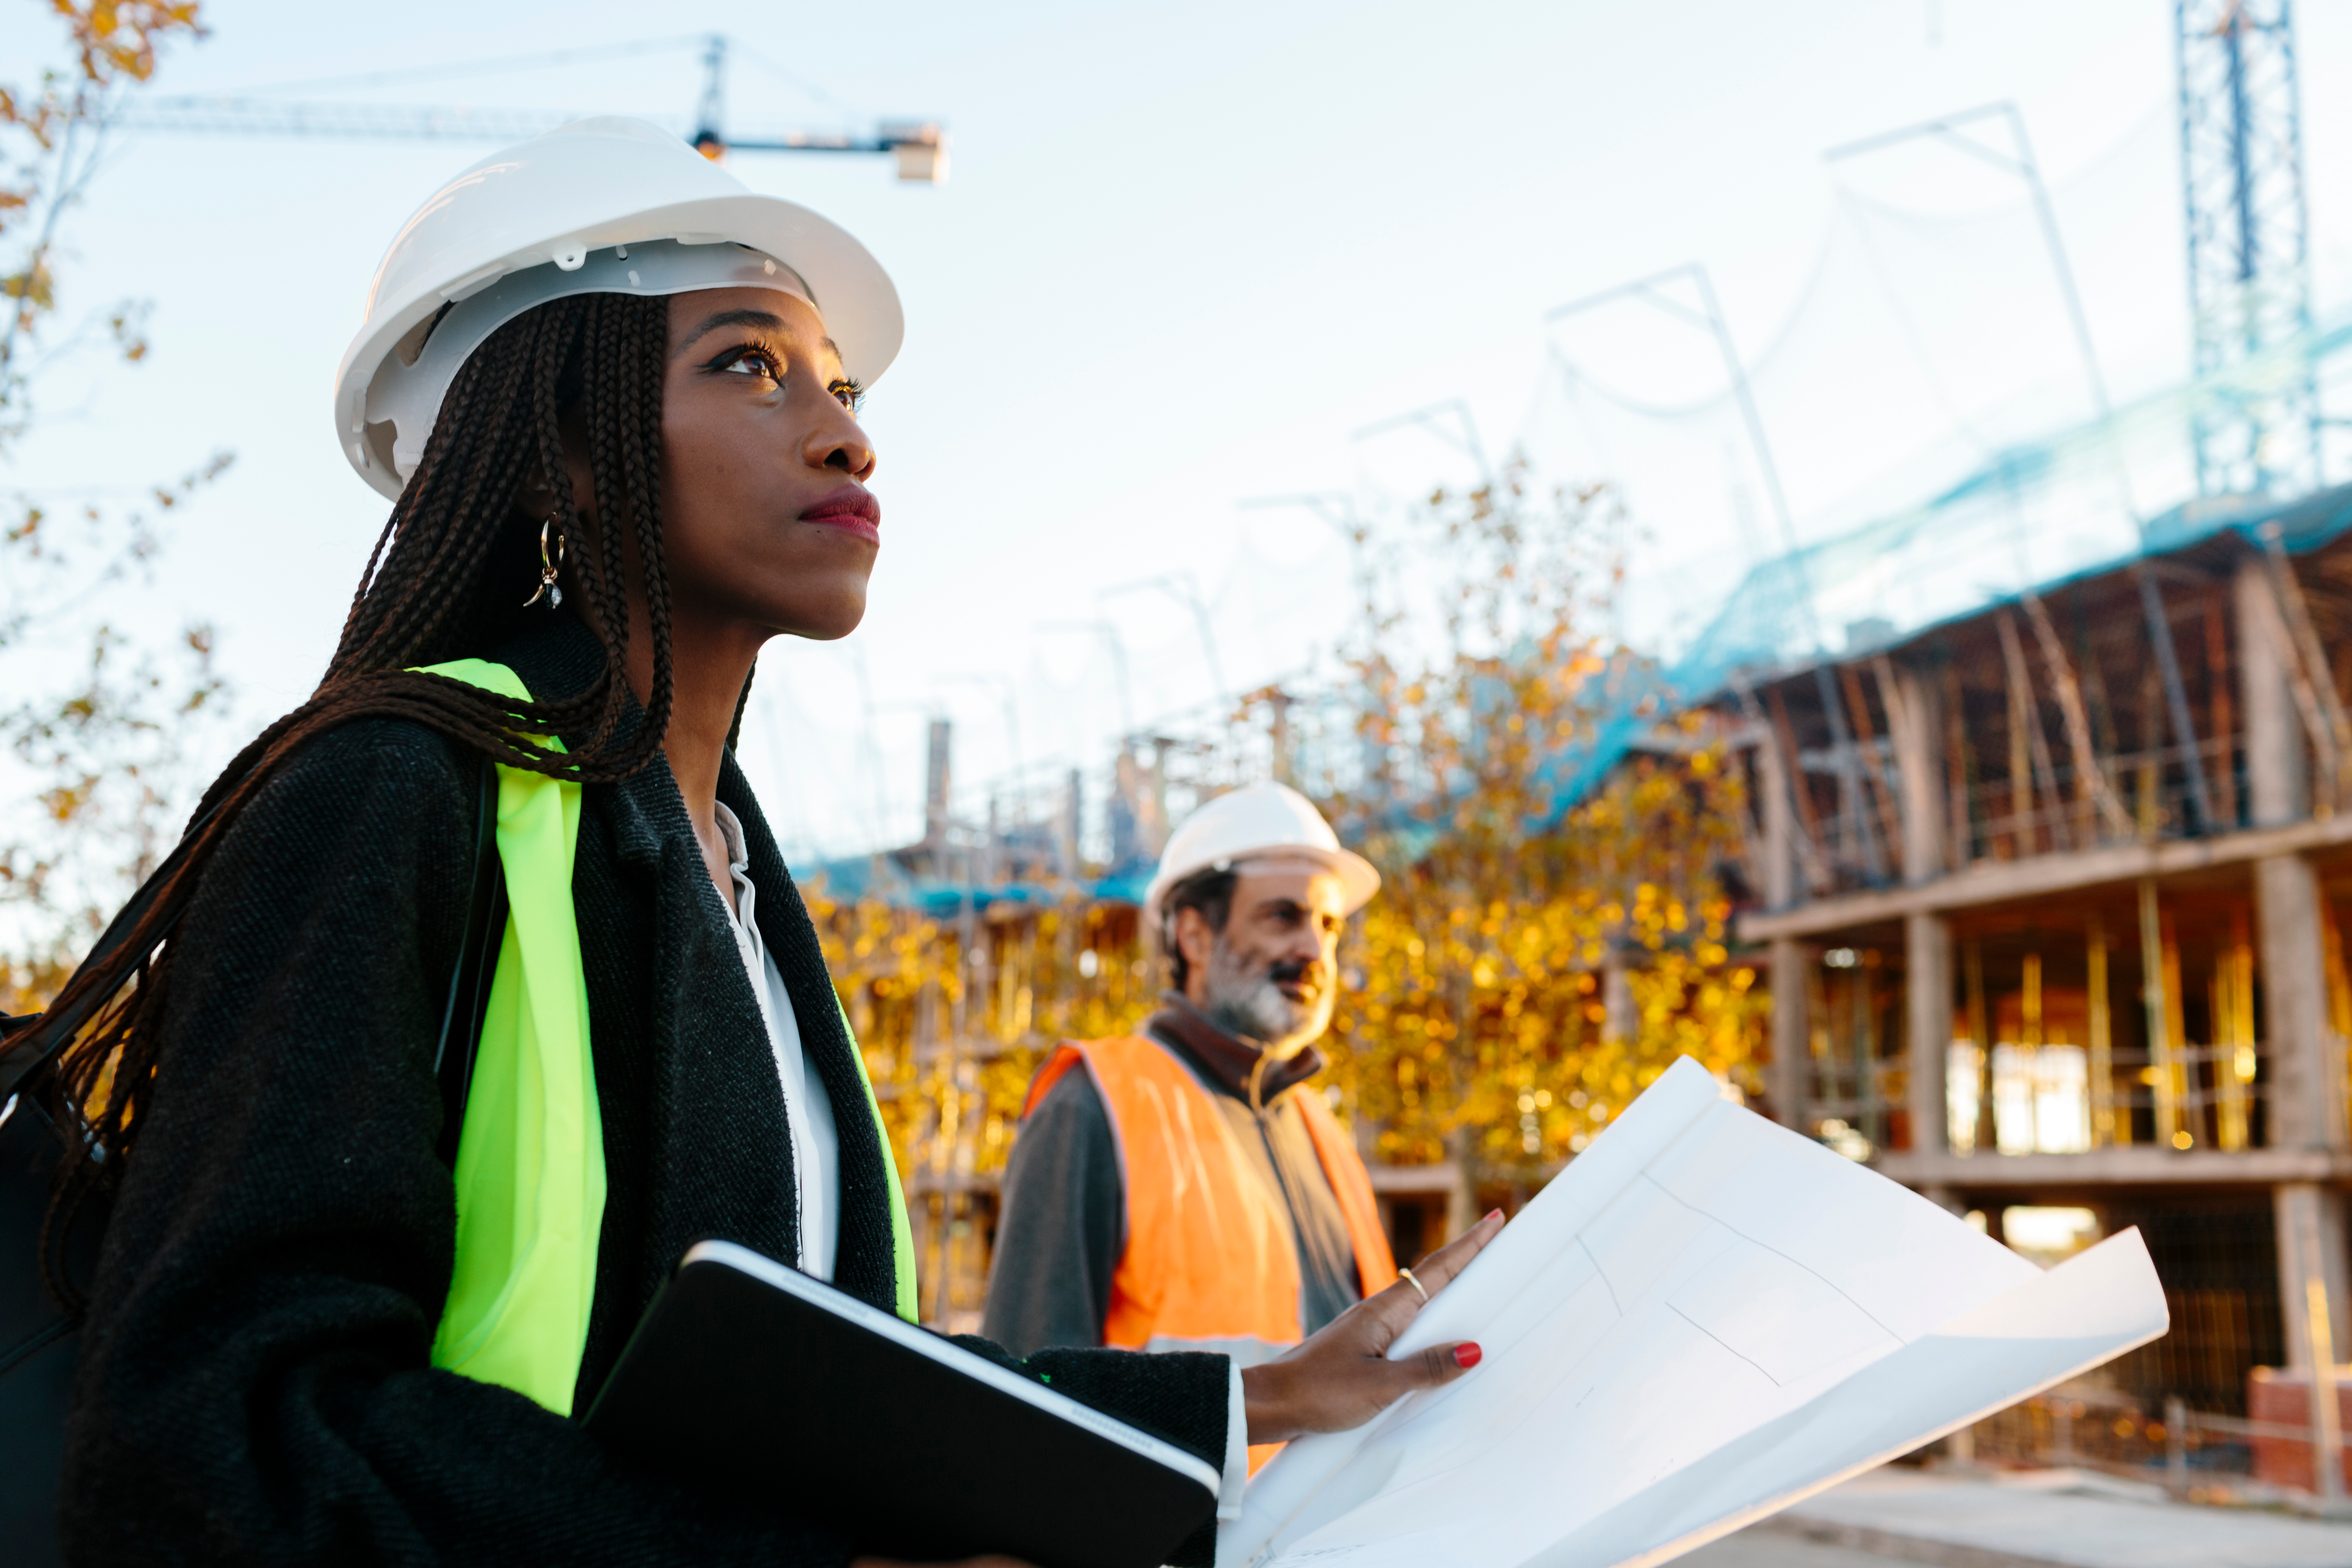 Supporting Women in Construction Is About Much More than Diversity